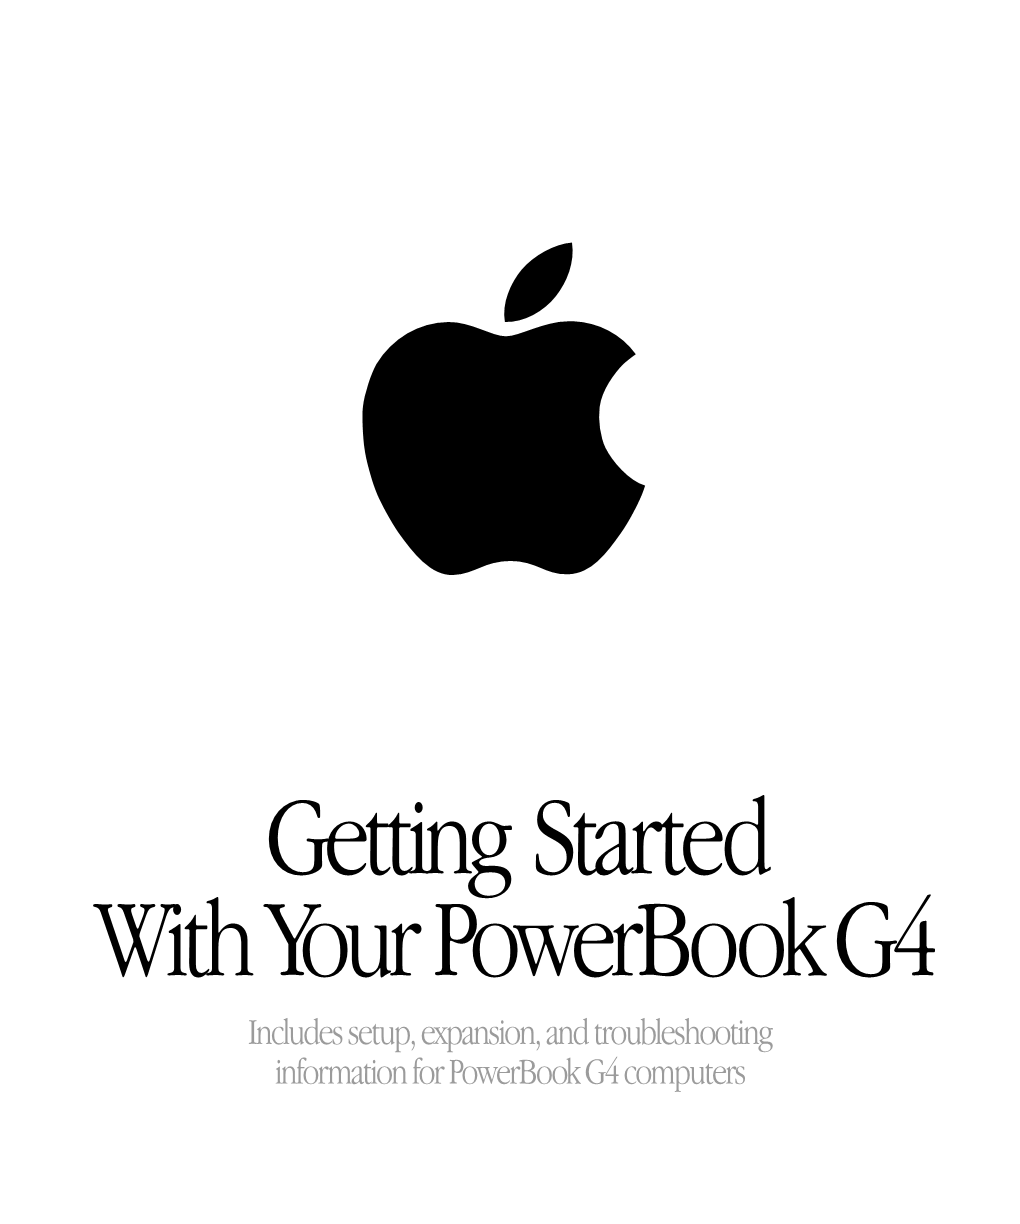 Getting Started with Your Powerbook G4 (Gigabit Ethernet)